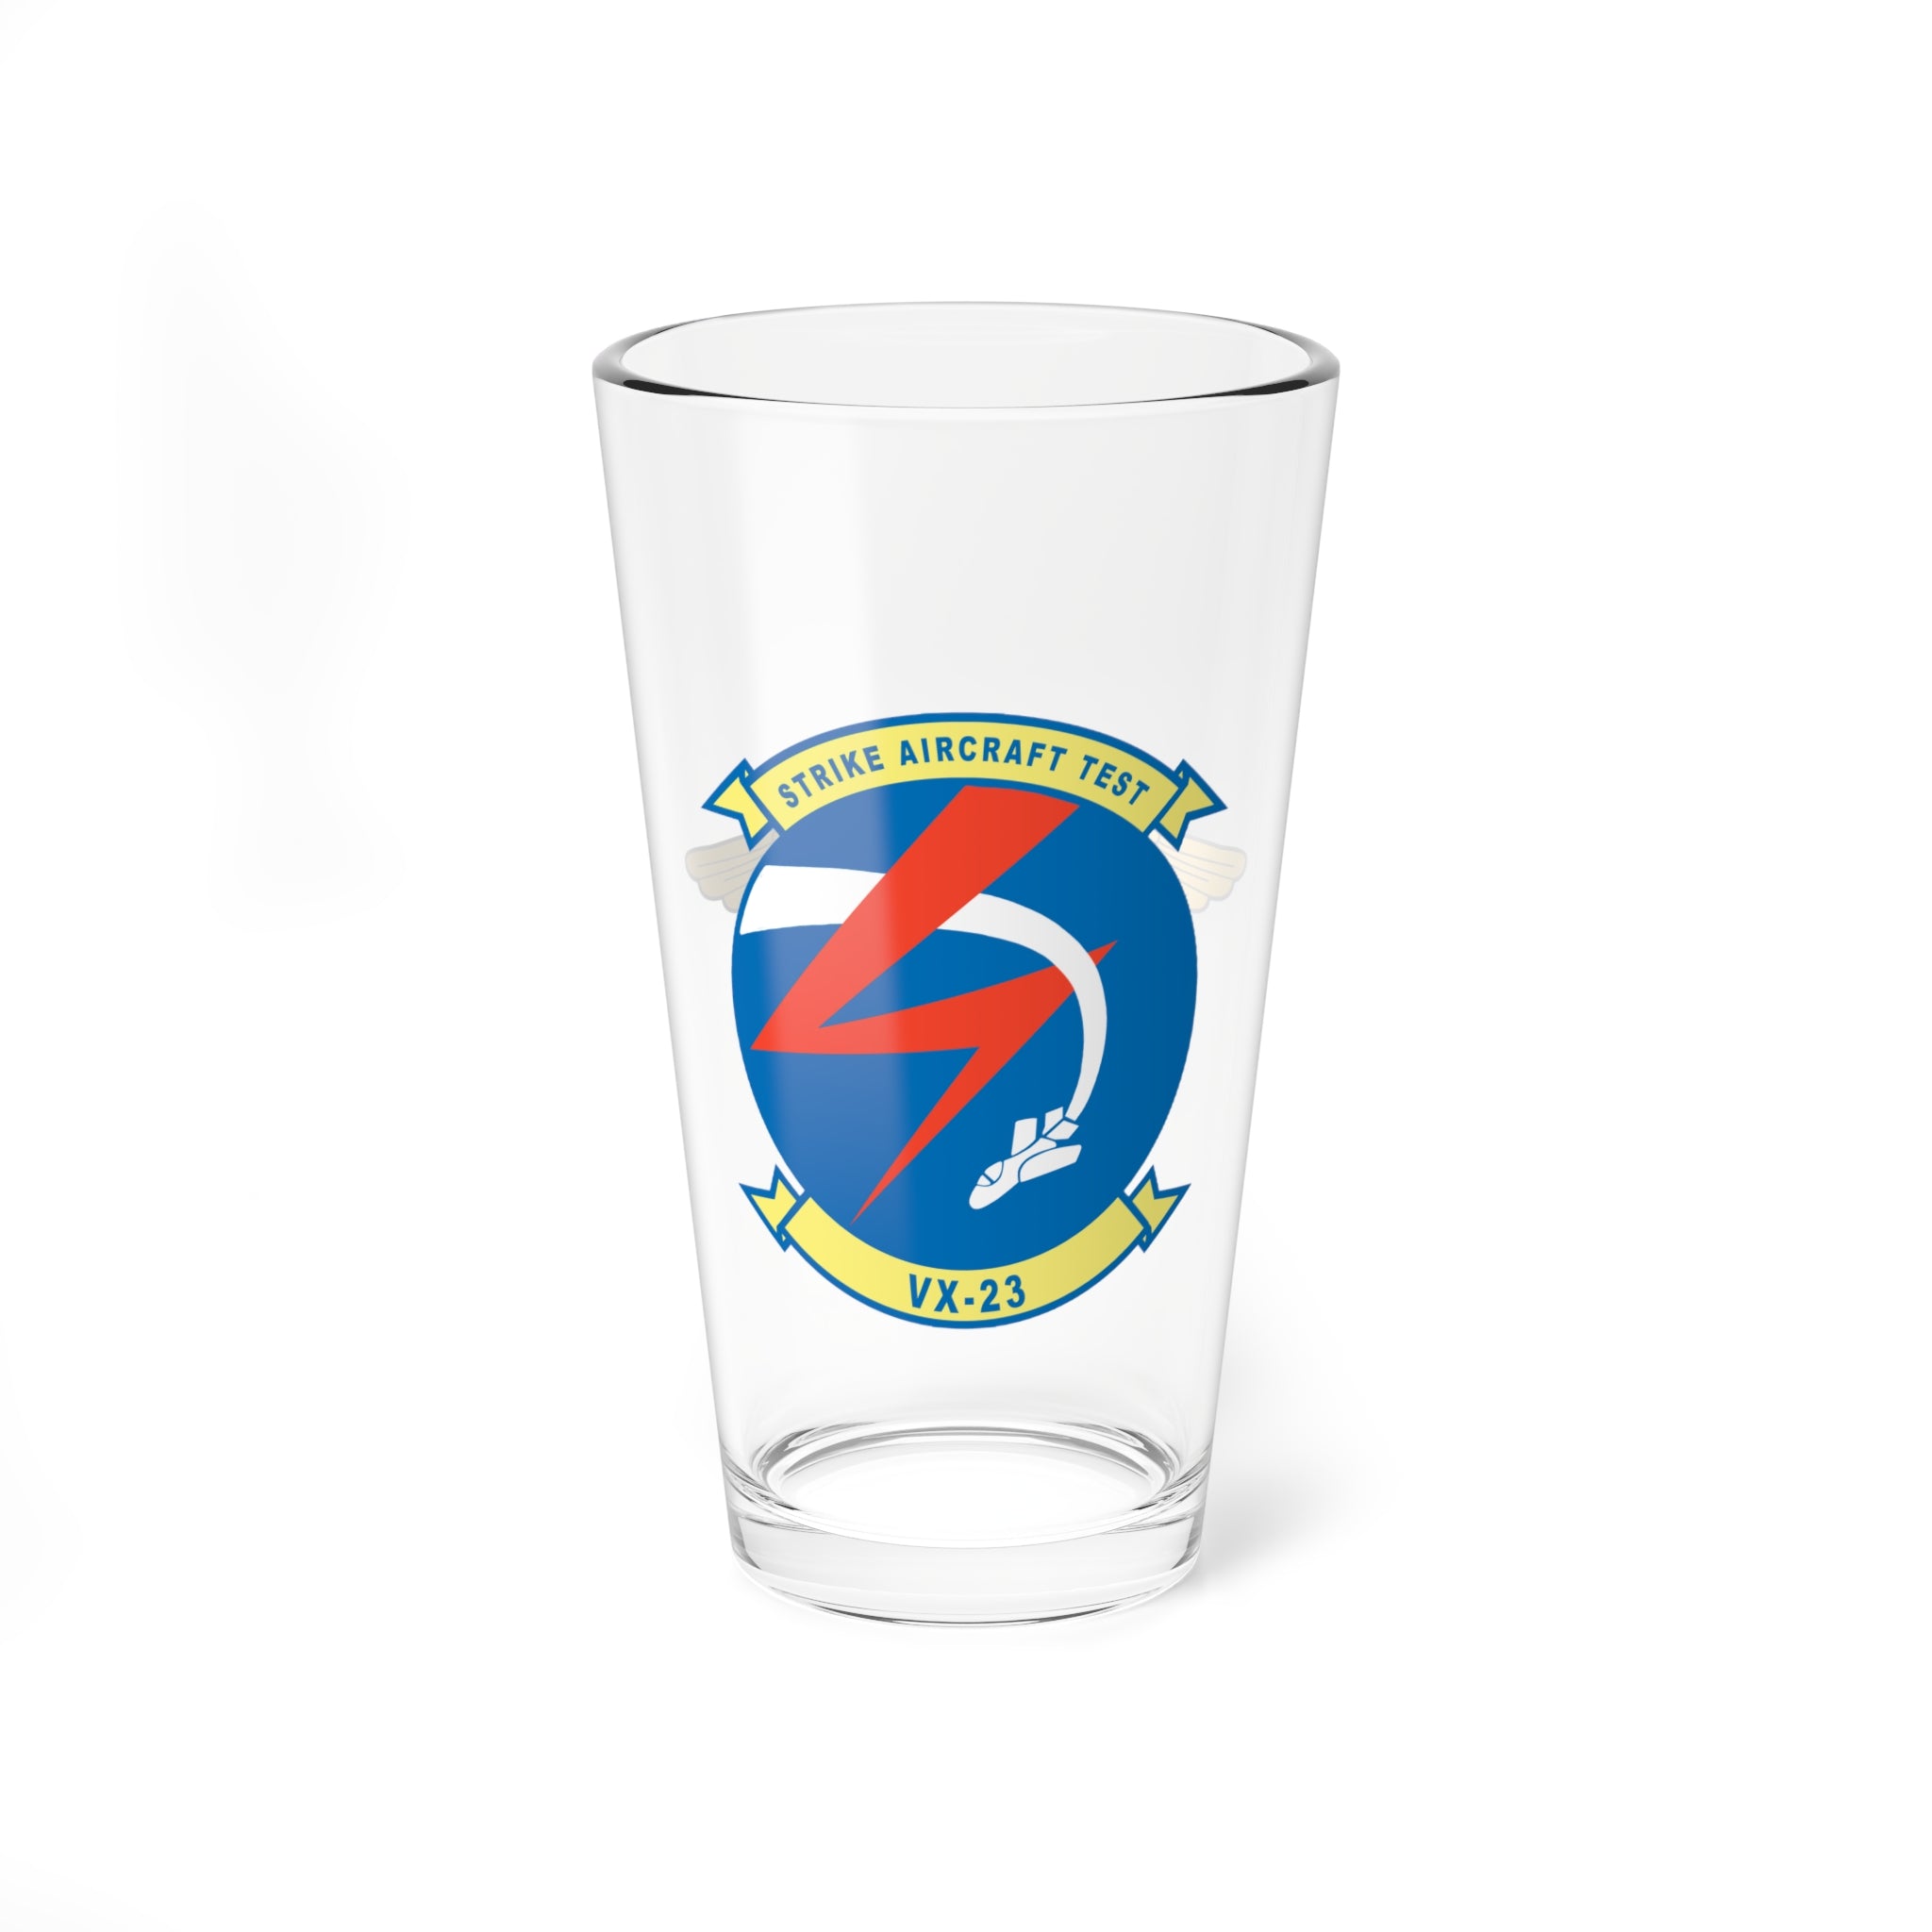 VX-23 Naval Aviator Wings Pint Glass, Navy Test and Evaluation Squadron